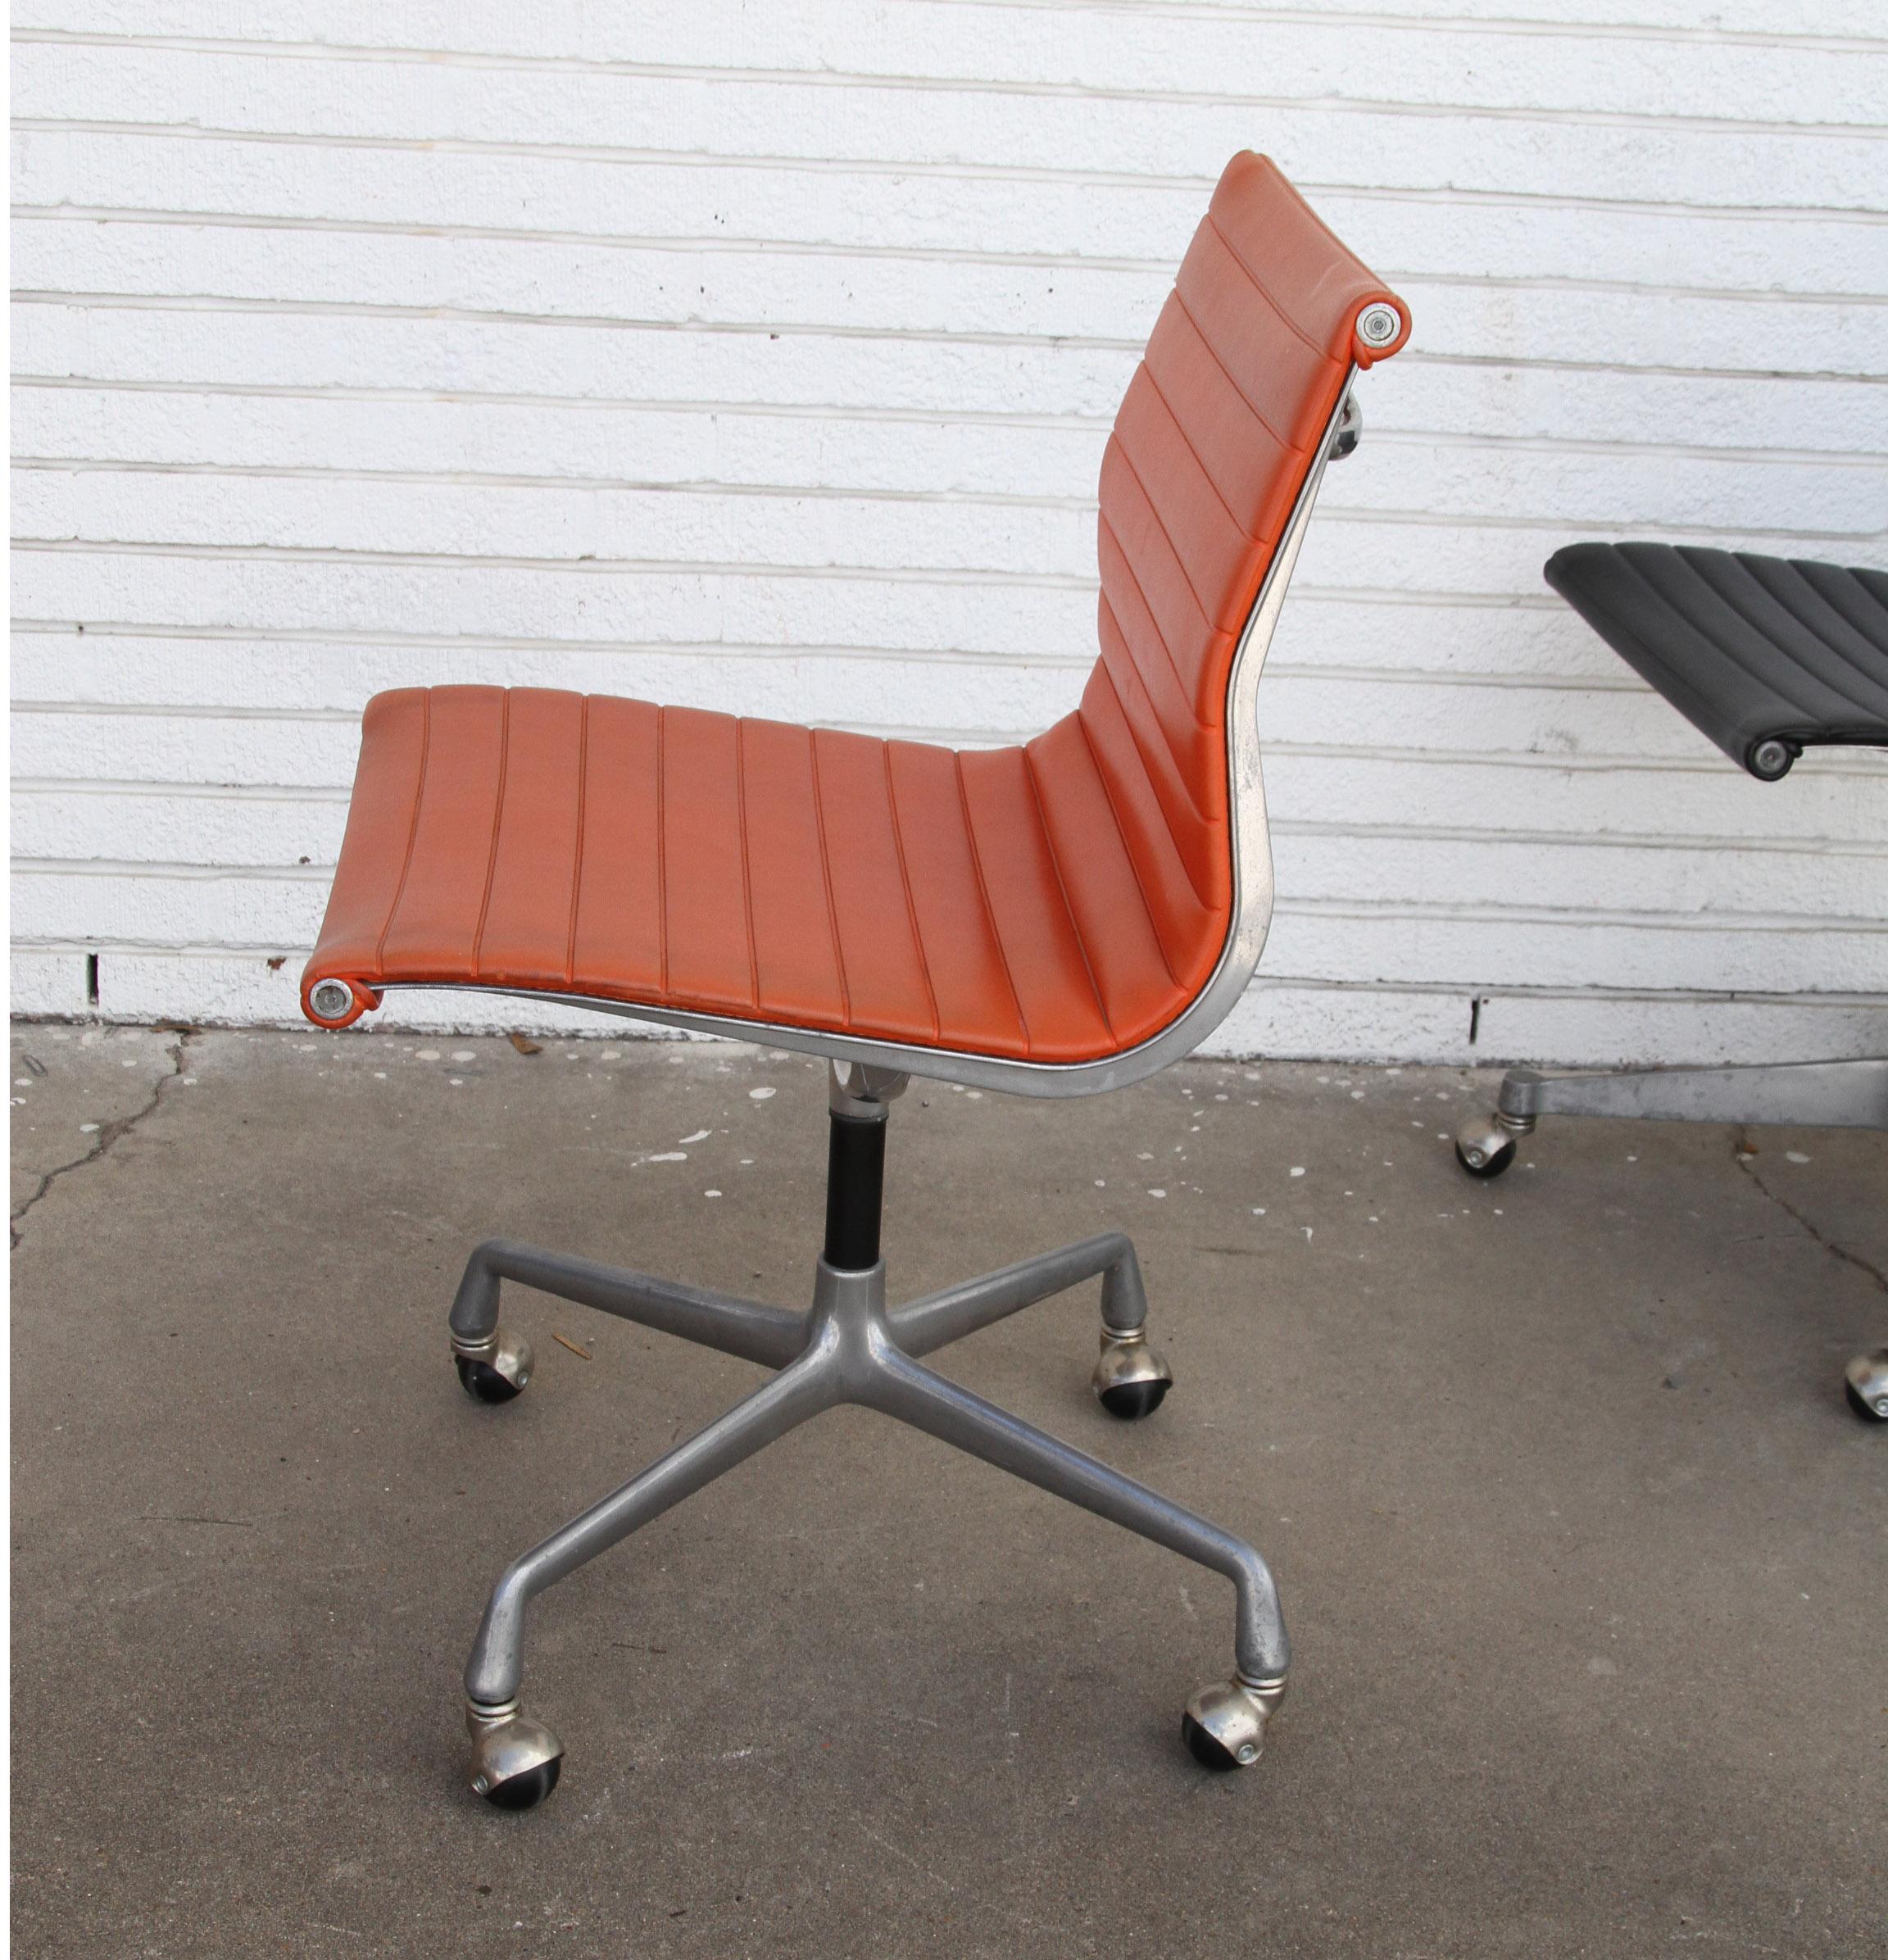 One Charles Eames Herman Miller aluminum group chair
1970s


Charles and Ray Eames aluminum group side chair, EA330 office conference chair in orange upholstery. The chair features a low-back with a lightweight aluminum frame. It has a 4-star